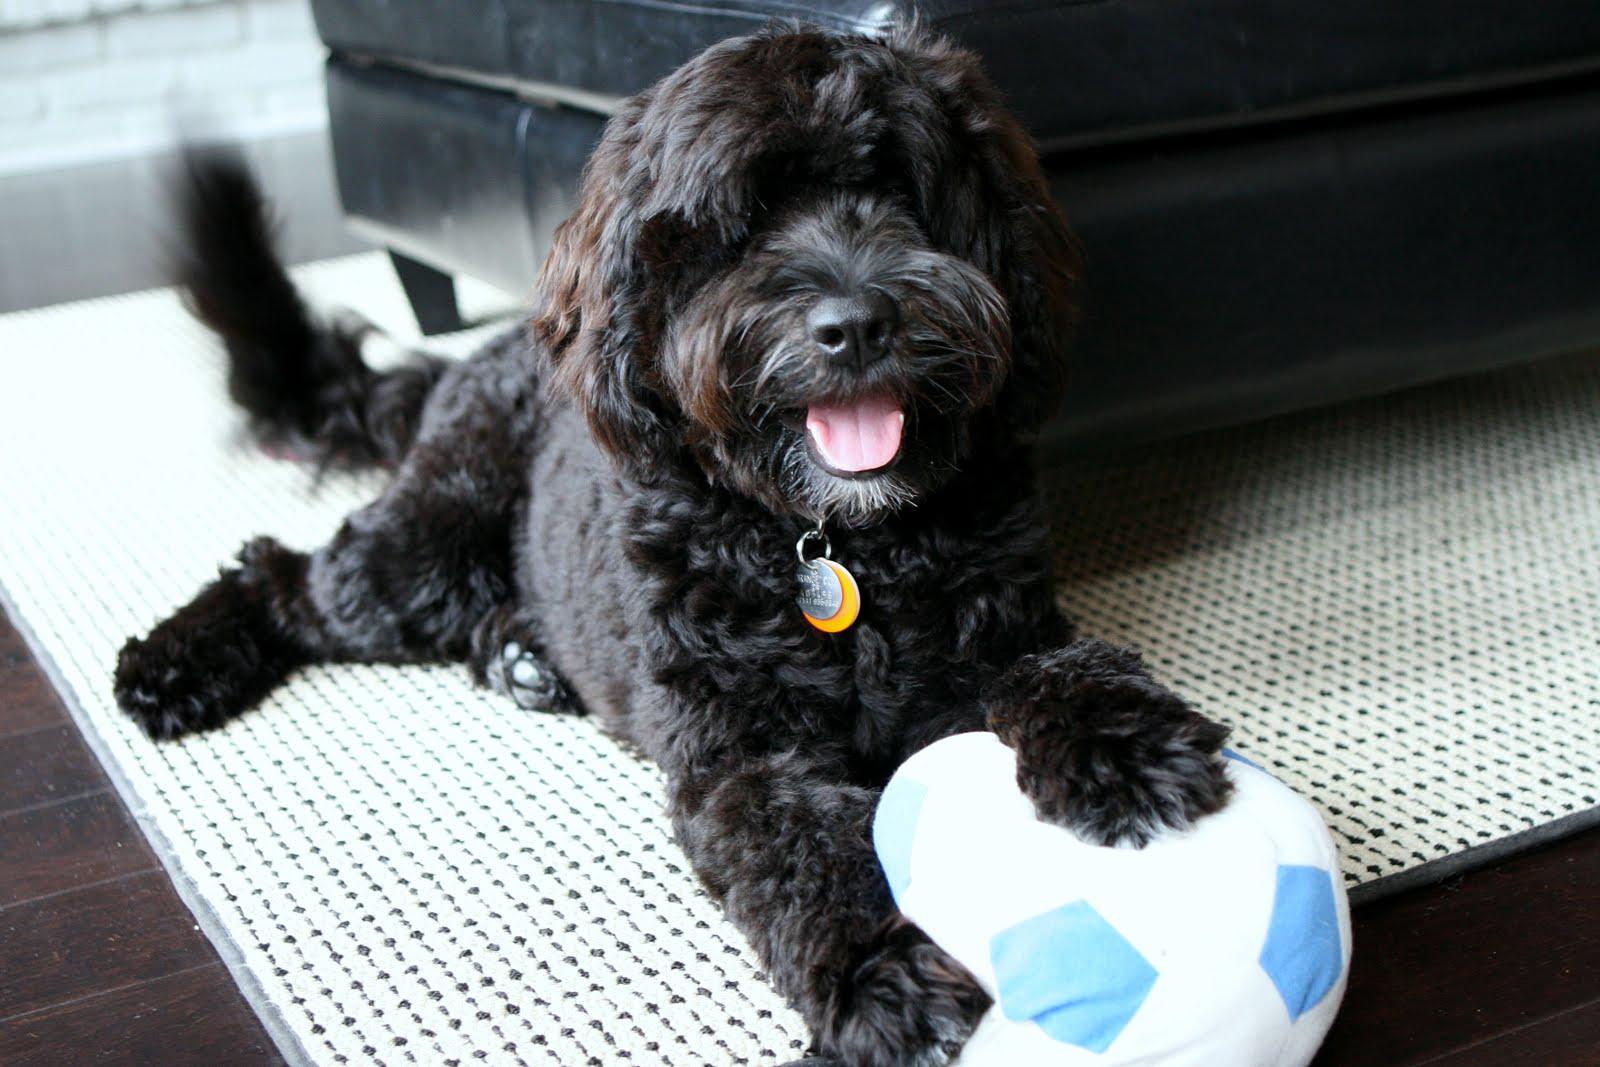 Portuguese Water Dog with a ball photo and wallpaper. Beautiful